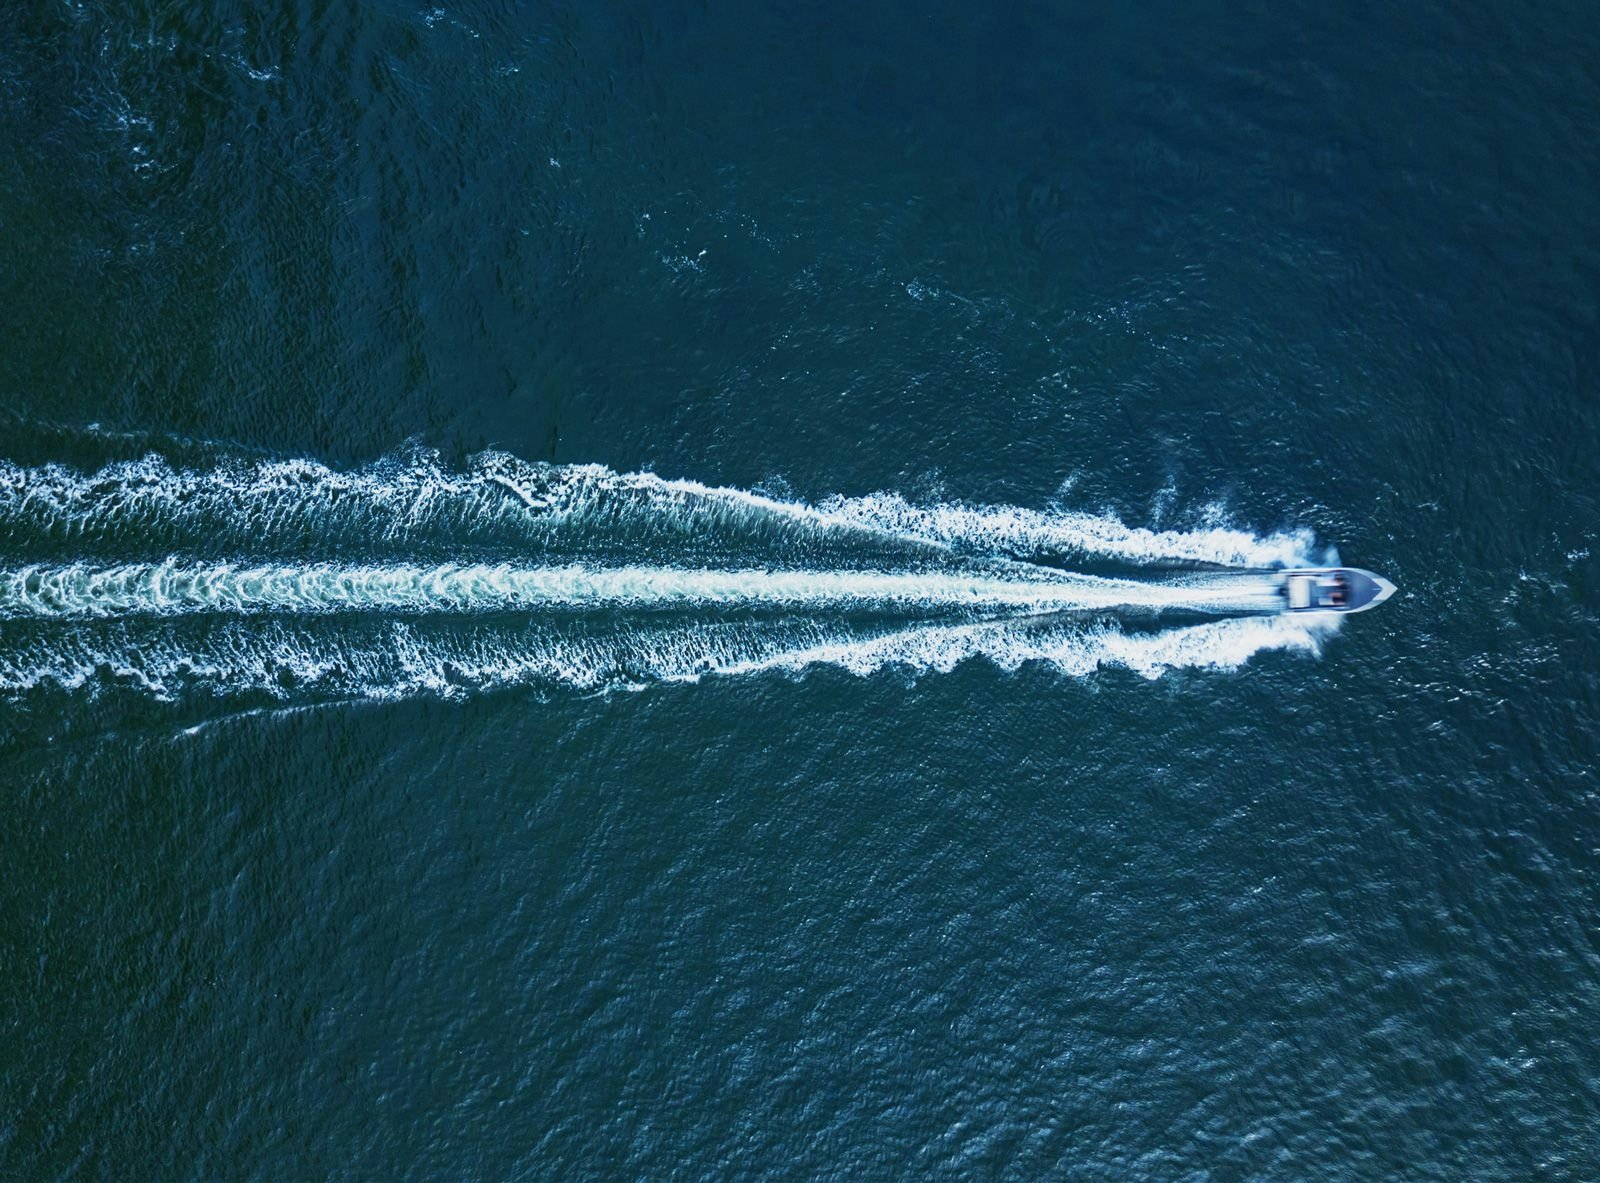 Ariel shot of a speedboat moving through the sea